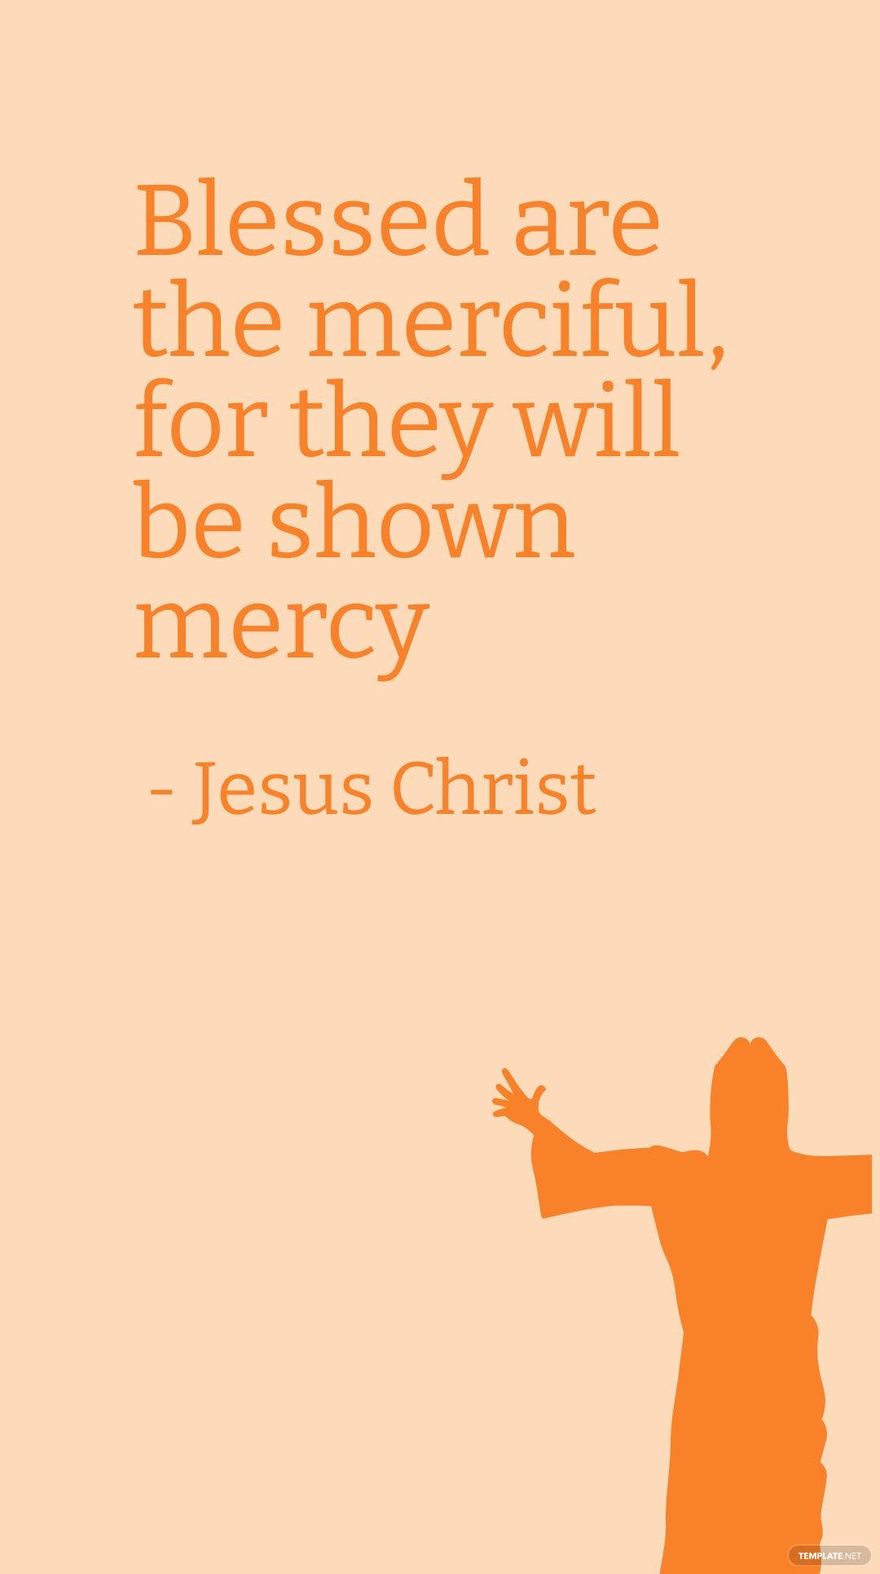 Jesus Christ - Blessed are the merciful, for they will be shown mercy in JPG